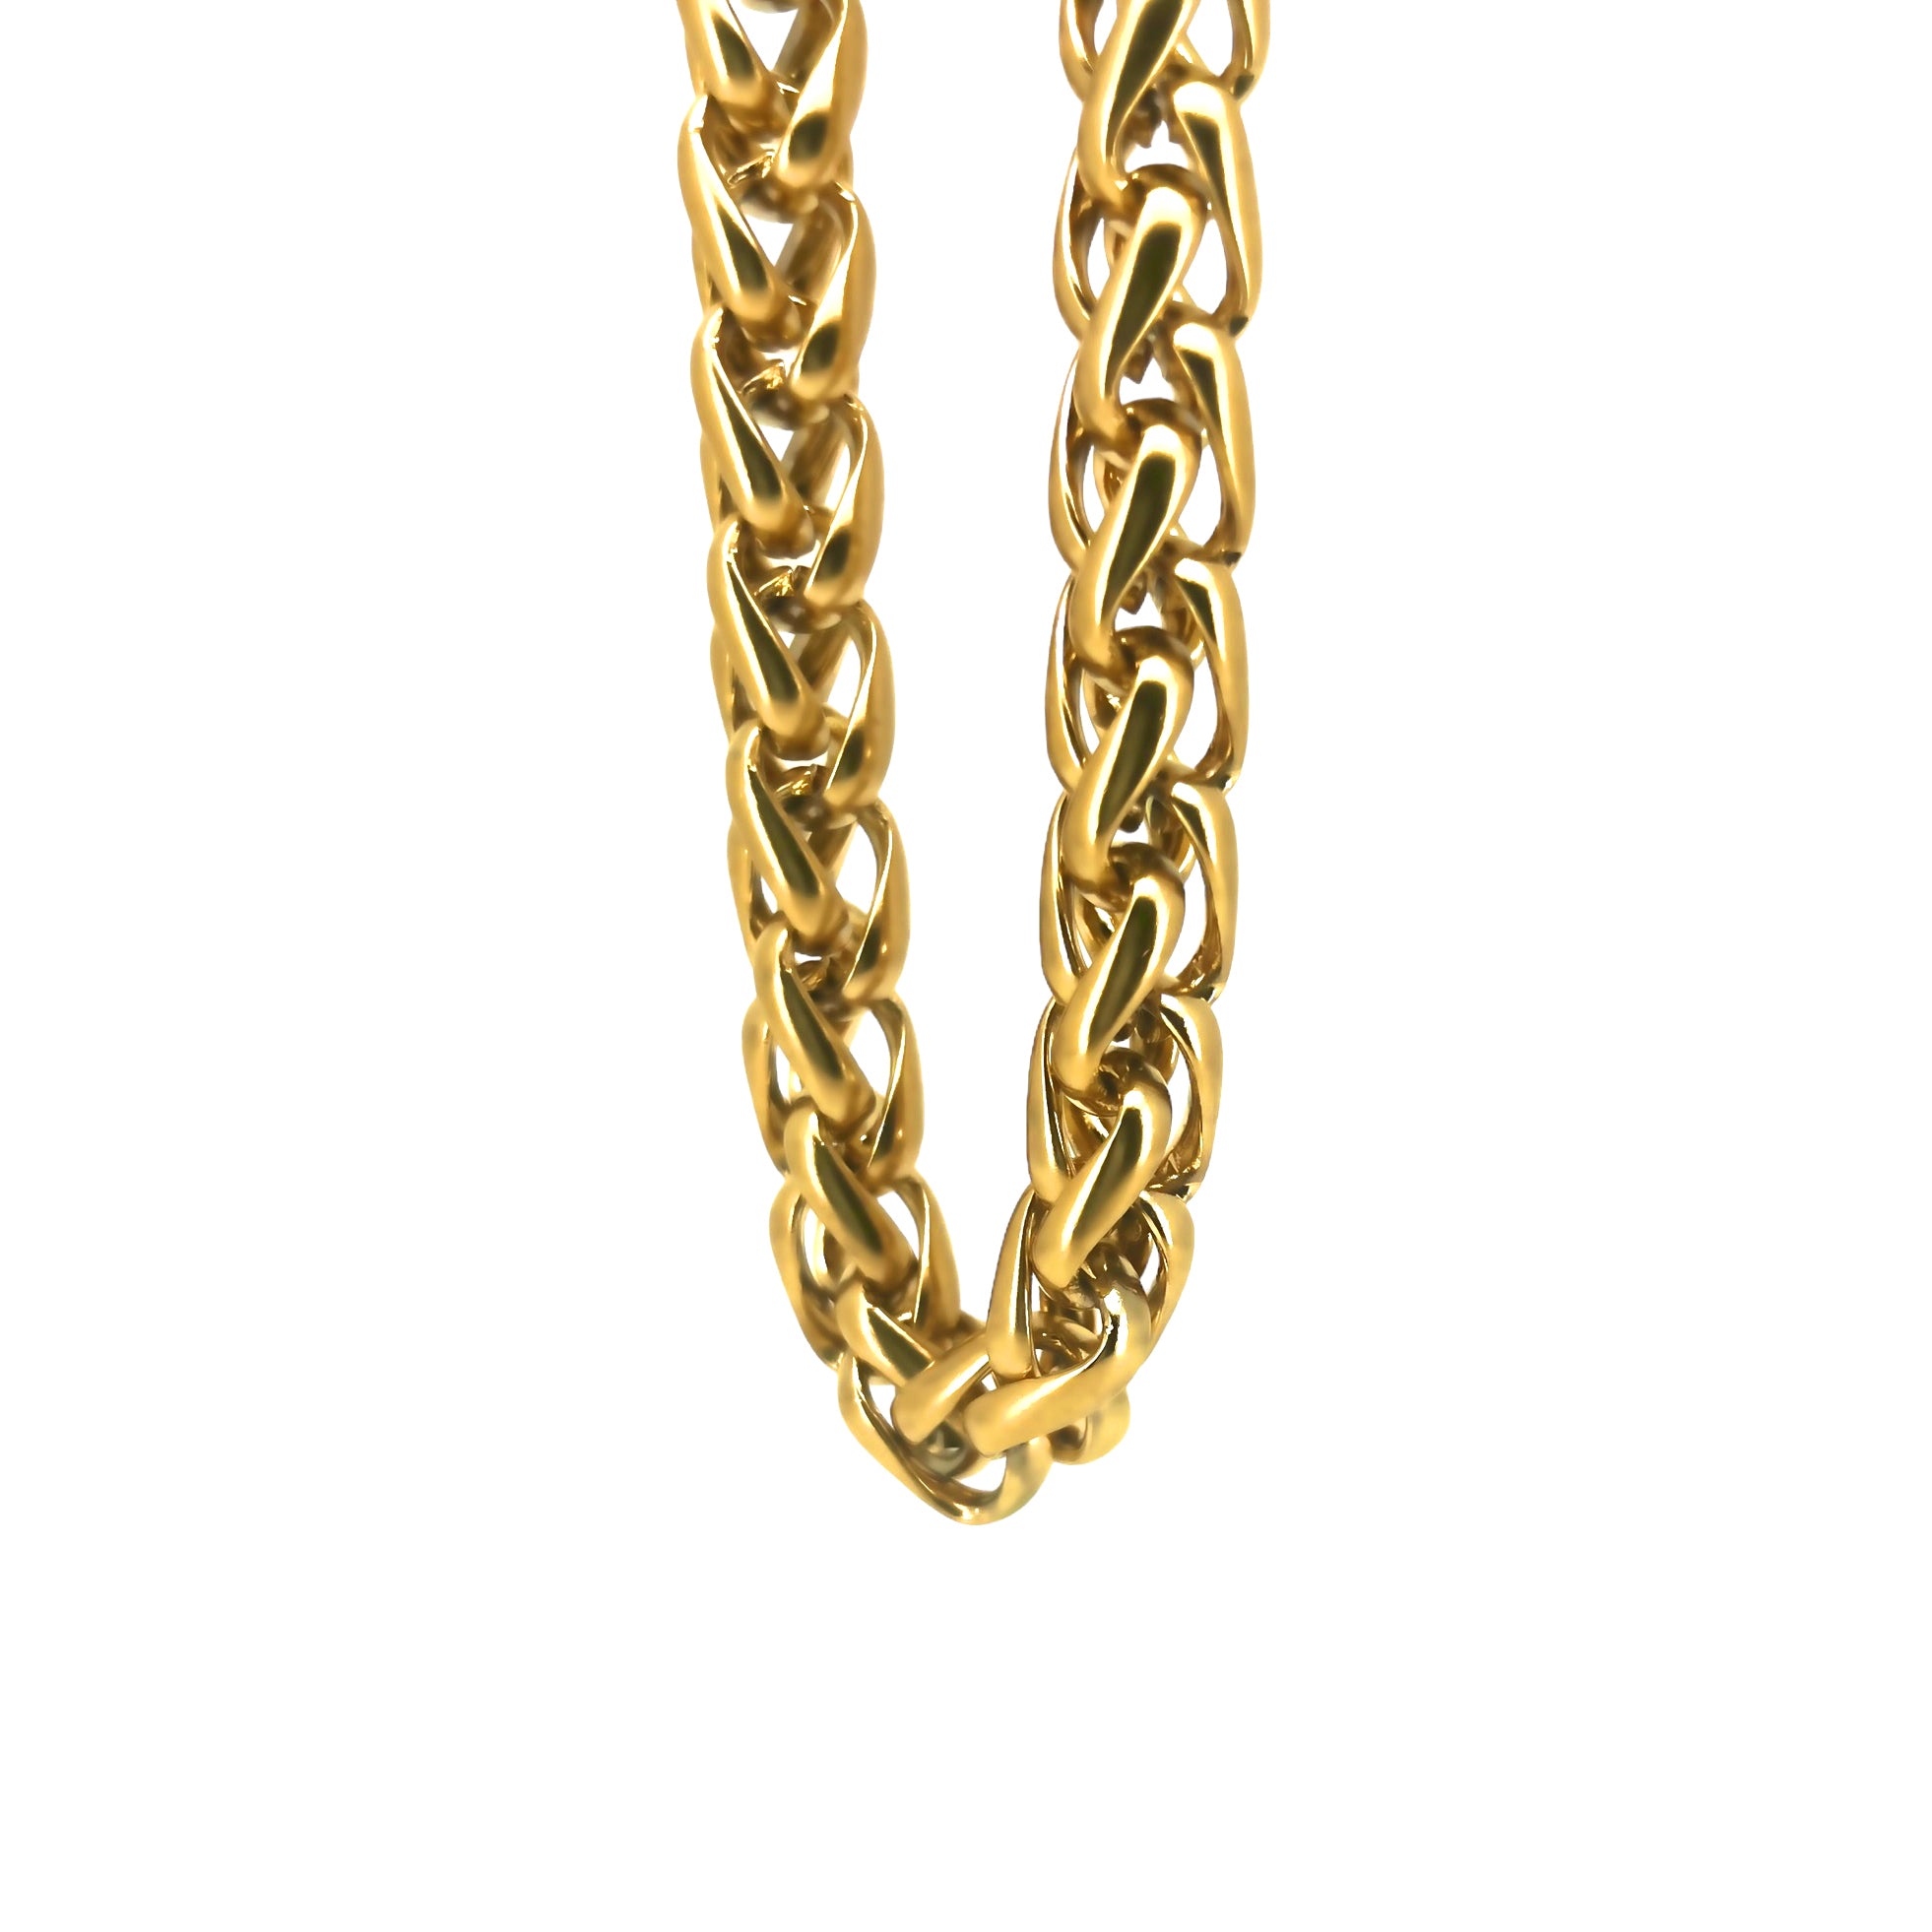 Enesenico Stainless Steel Wheat Chain Necklace